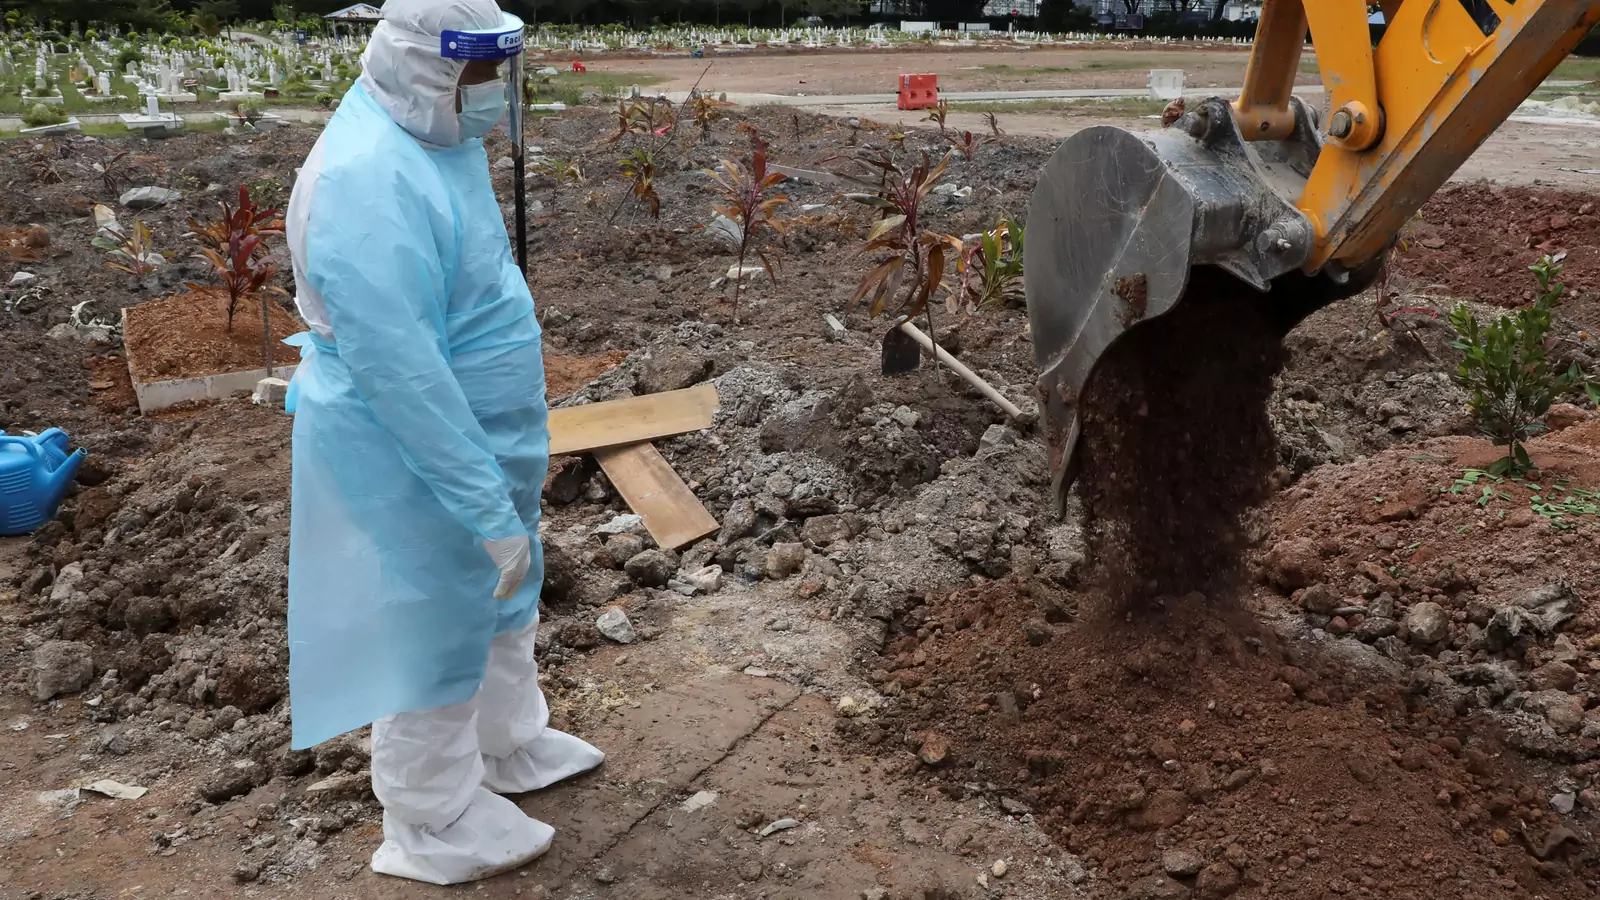 A cemetery worker wearing a protective suit helps to bury a victim of the coronavirus disease (COVID-19) at a cemetery in Shah Alam, Malaysia, on July 14, 2021.